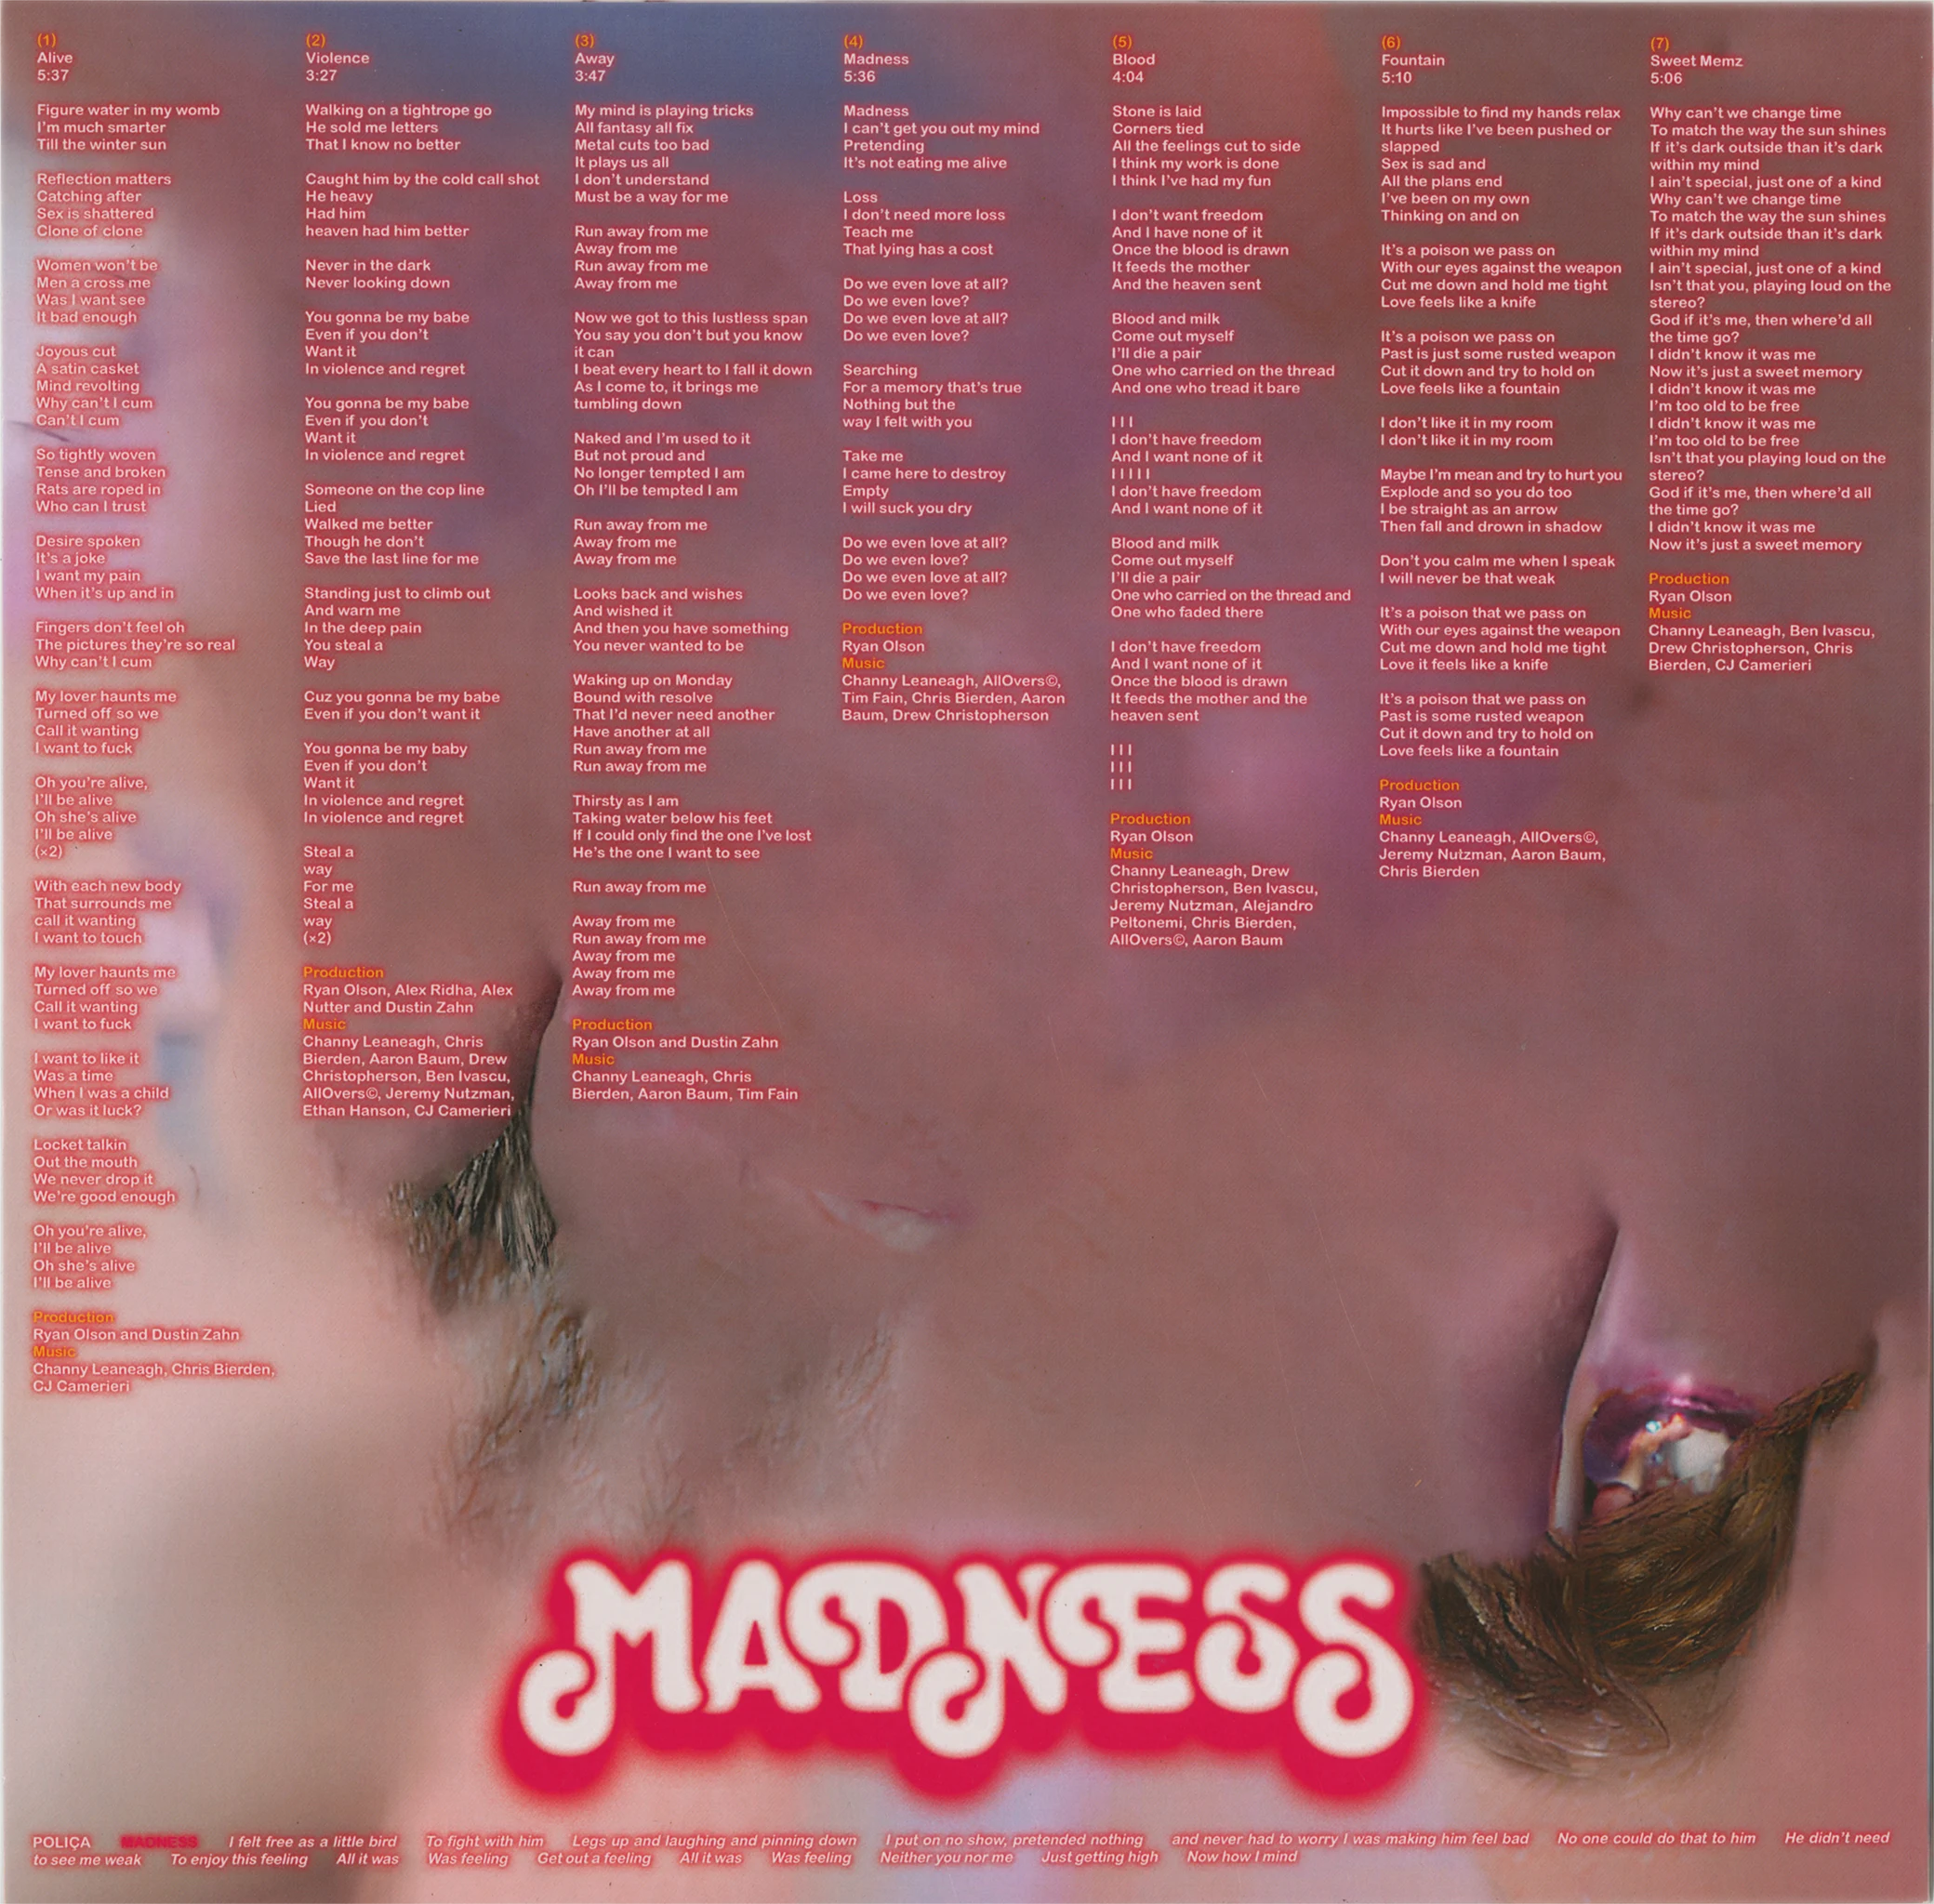 Back of a vinyl record sleeve for Madness by Poliça